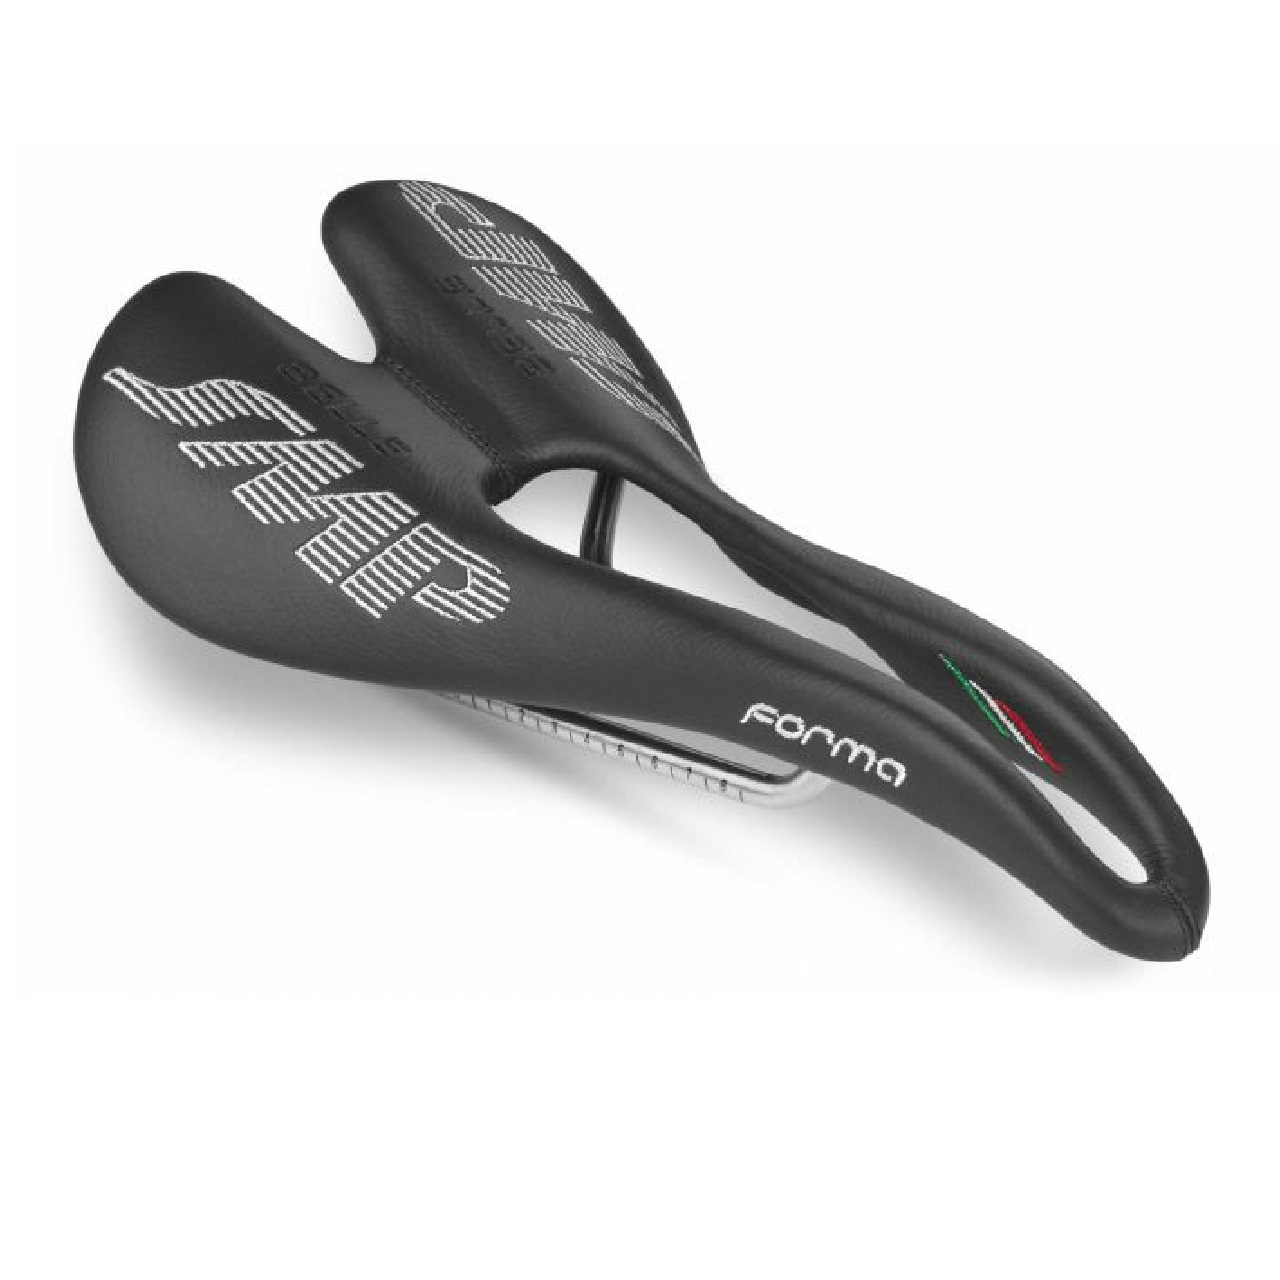 Selle SMP FORMA Bike Saddle Seat Black with stainless Steel Rails